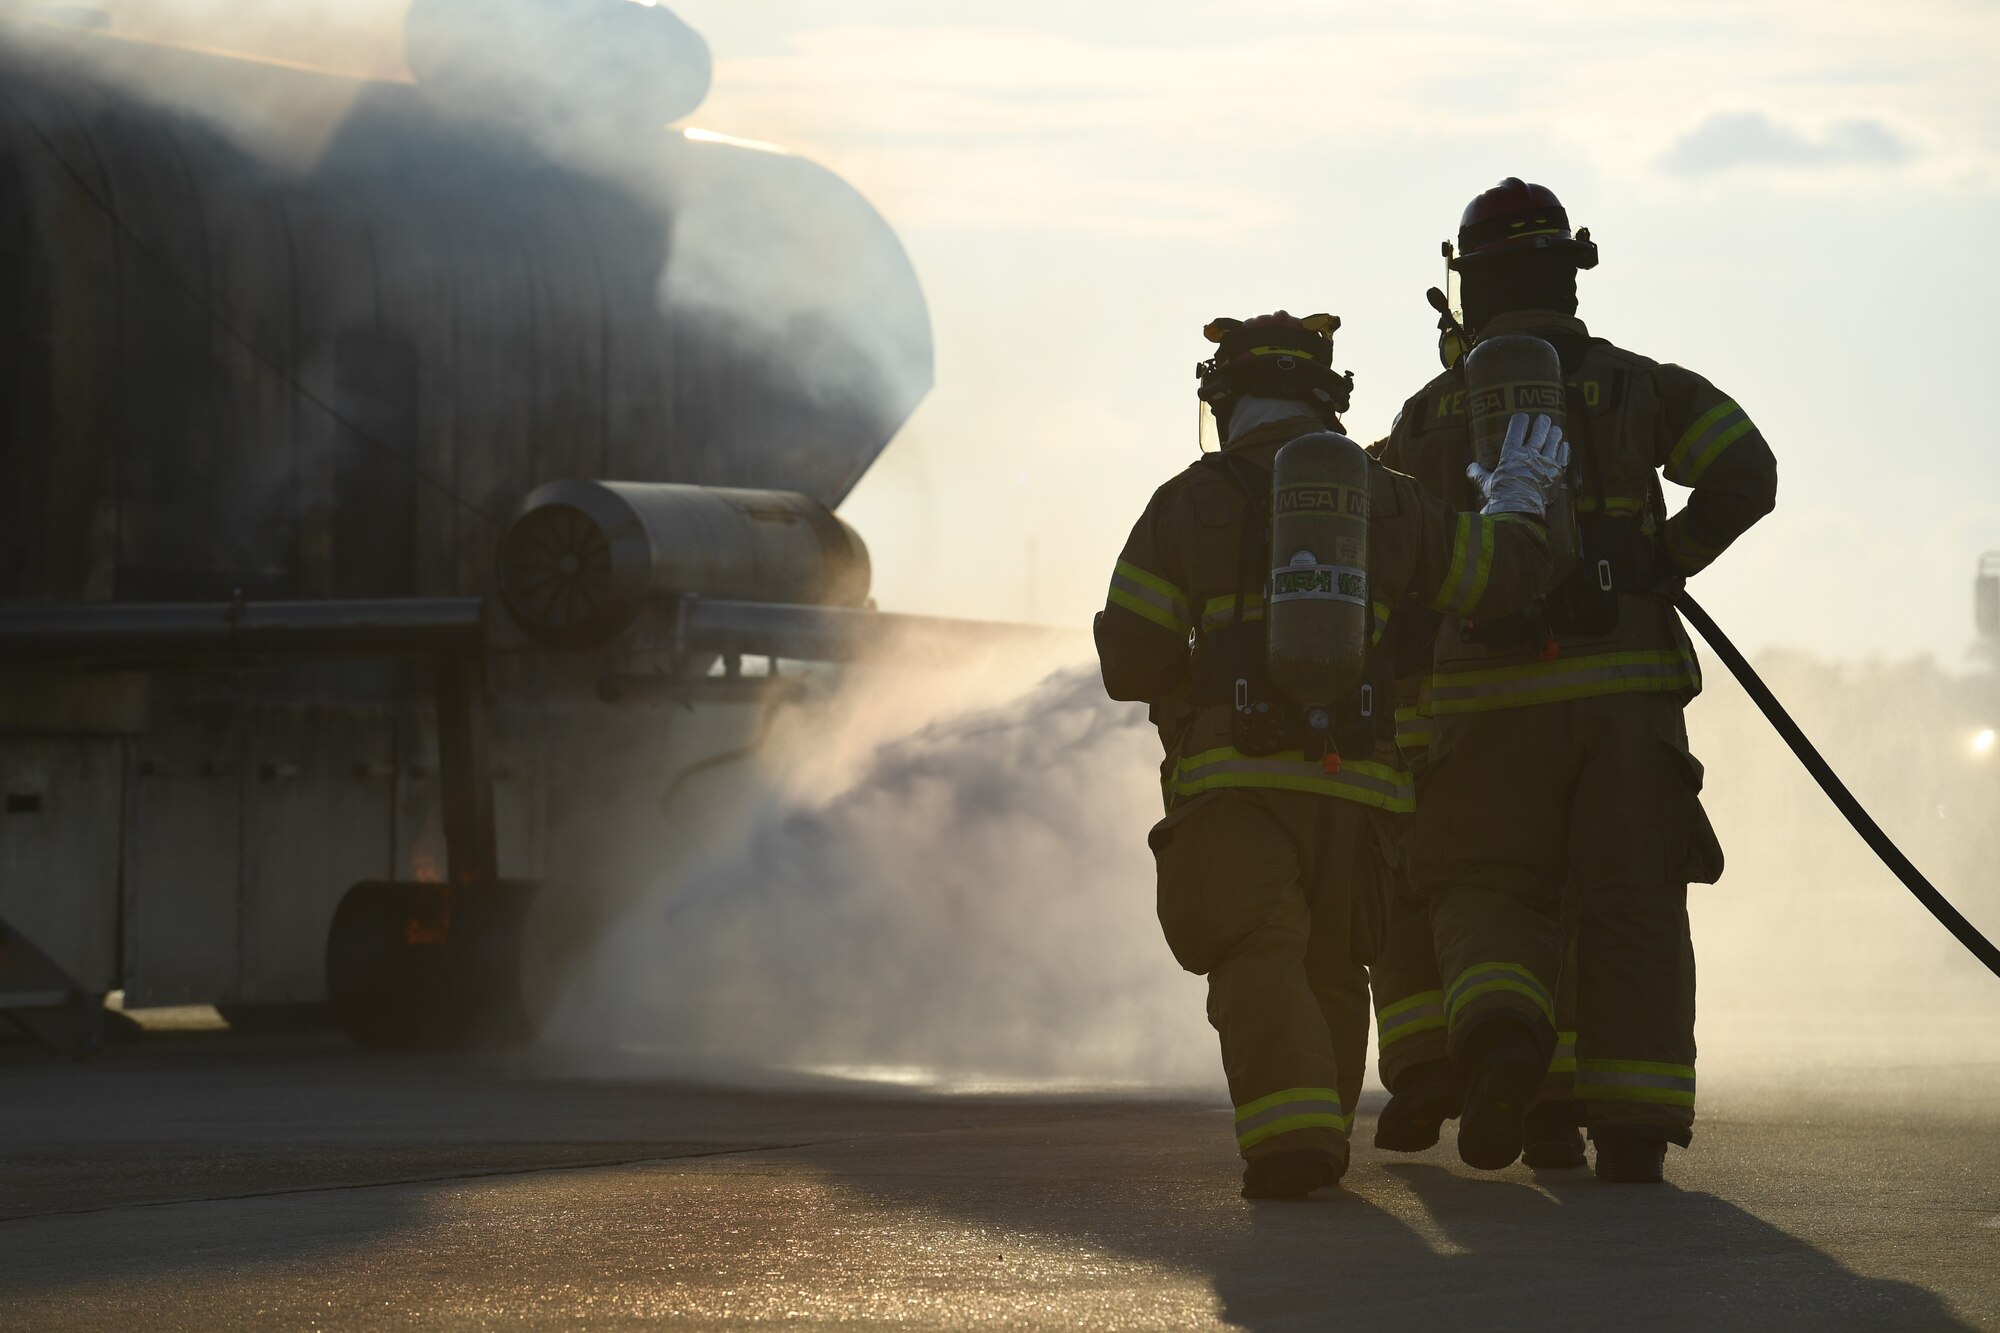 Keesler firefighters use a hand-held hose to extinguish a fire on a mock C-123 training device during an aircraft rescue fire fighting training on Keesler Air Force Base, Mississippi, June 4, 2019. The joint agency training allowed the Keesler Fire Department, Gulfport Combat Readiness Training Center Fire Department, Stennis Airport Fire Department and the U.S. Naval Air Station Pensacola Gulf Coast Fire Rescue to meet the semi-annual training requirement to practice aircraft rescue and live fire training evolutions. (U.S. Air Force photo by Kemberly Groue)